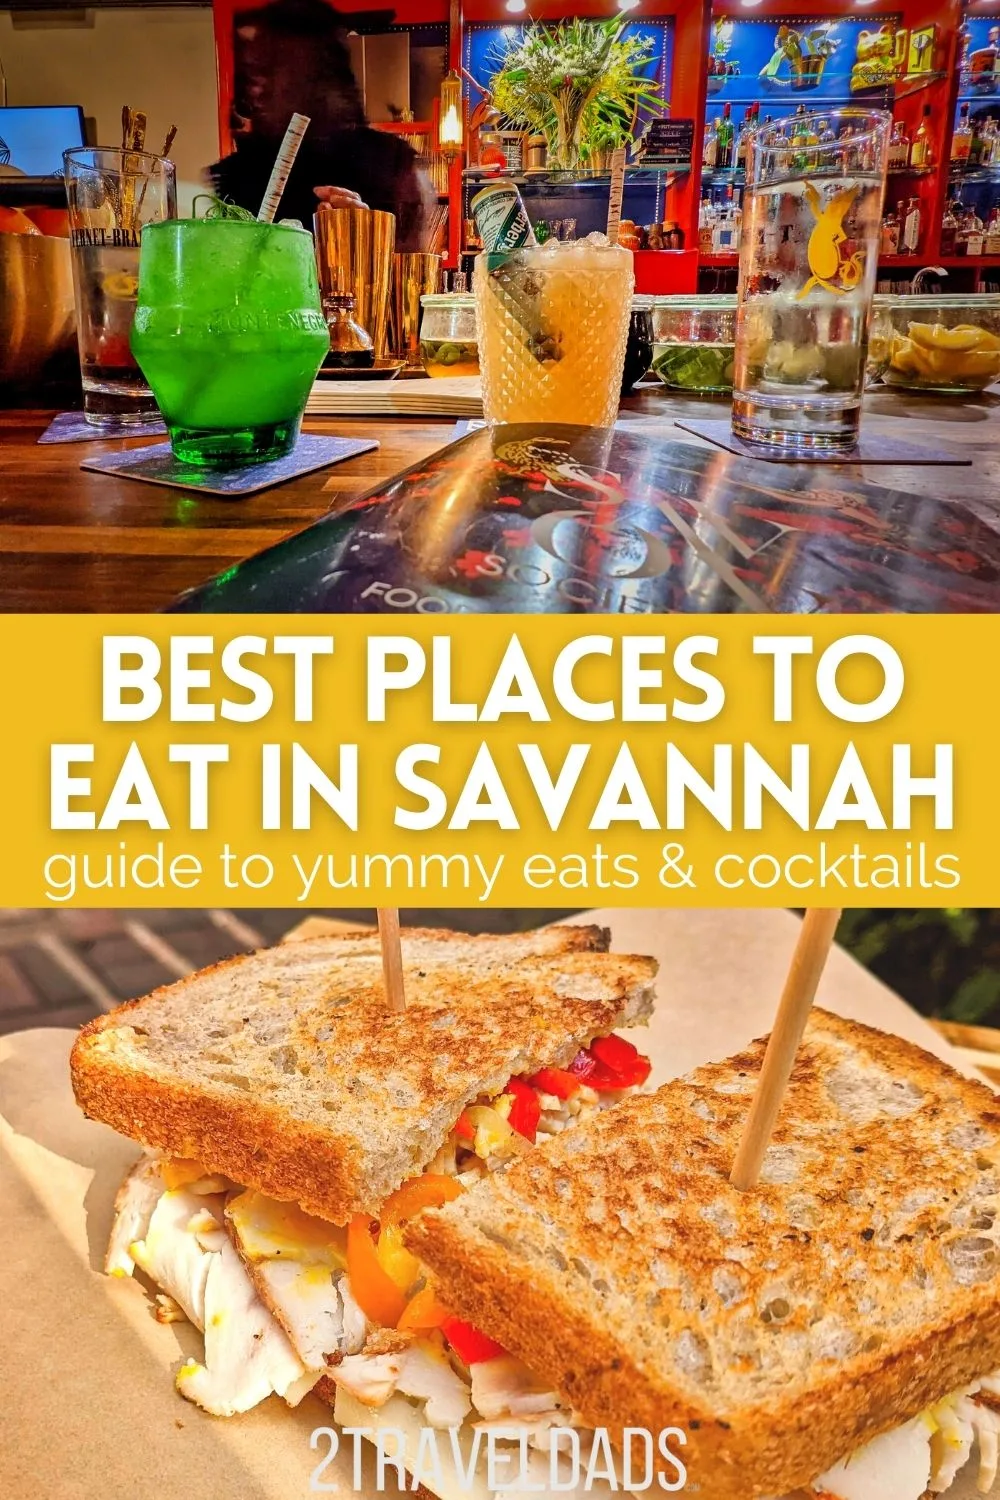 Review list of the best places to eat in Savannah. - Savannah restaurants are fantastic. The blend of interesting food and cocktail culture make Savannah, Georgia the ultimate foodie destination.